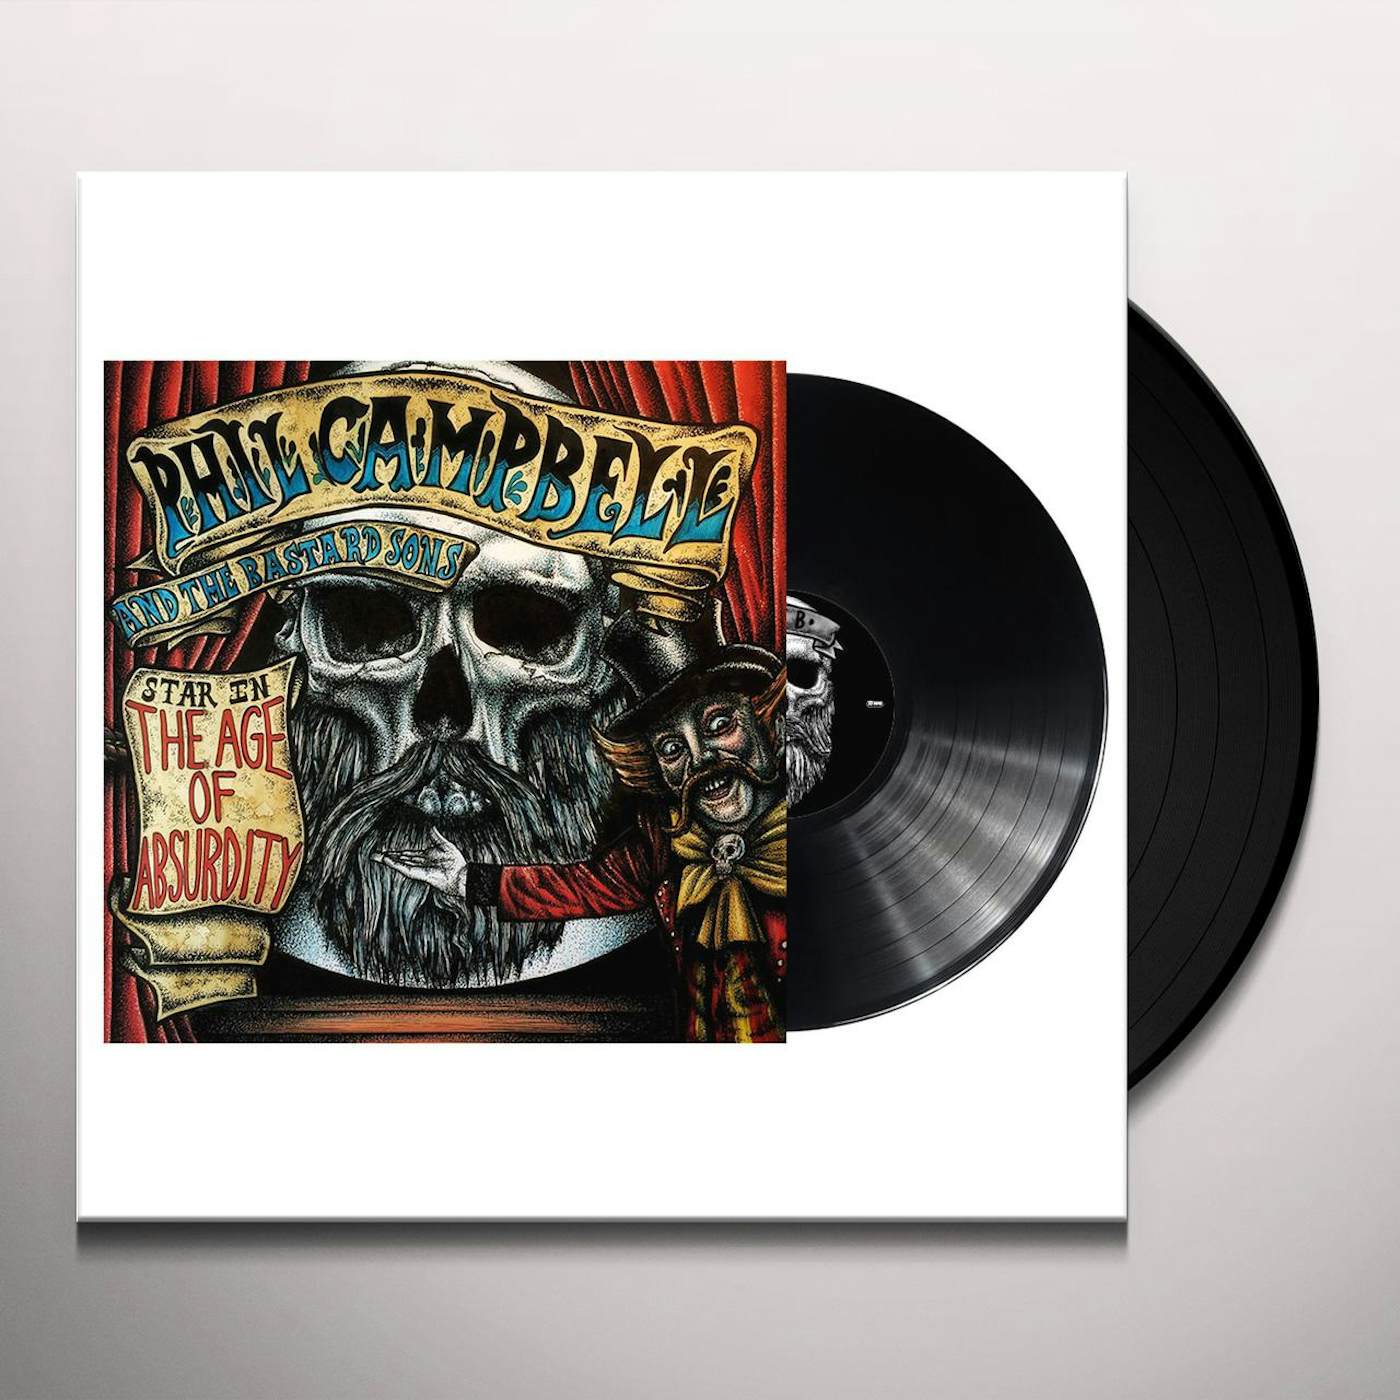 Phil Campbell and the Bastard Sons AGE OF ABSURDITY Vinyl Record